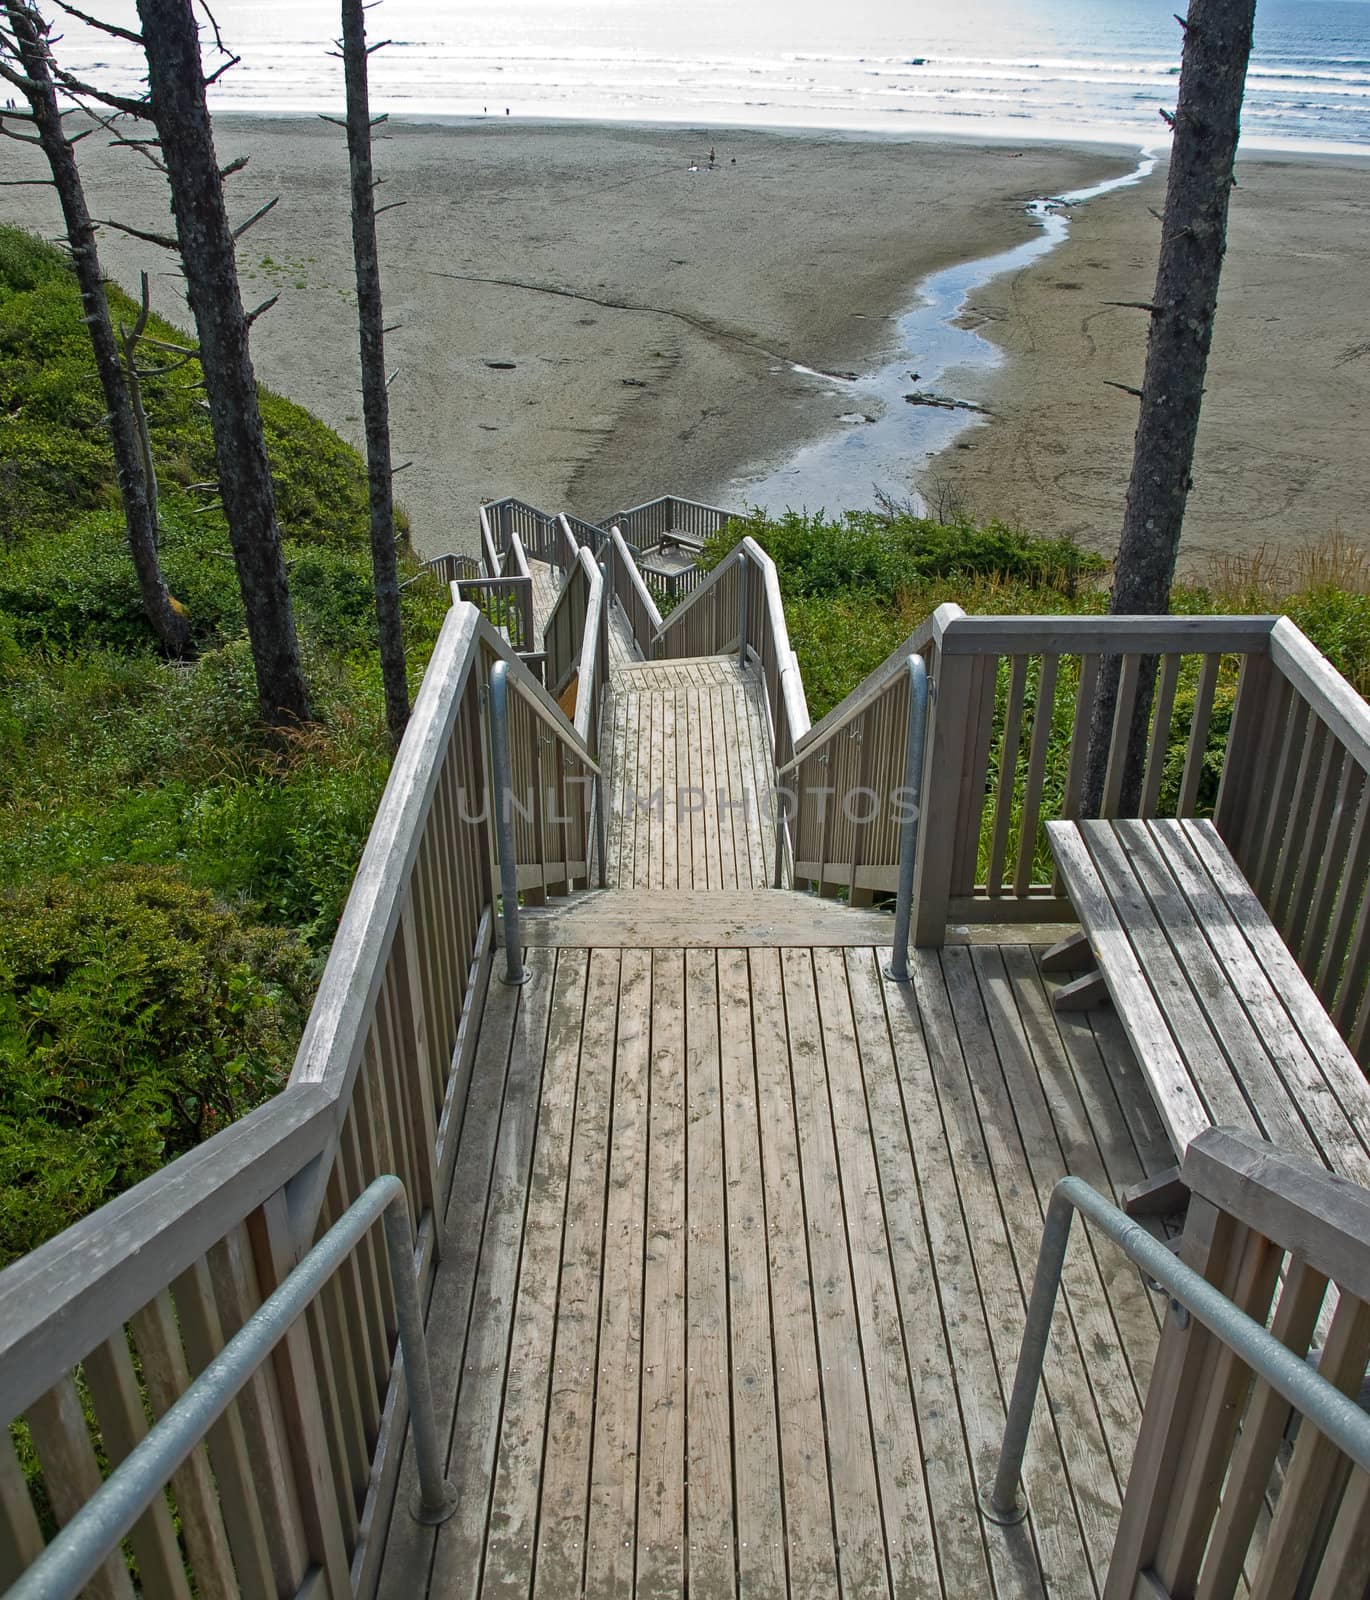 A Wooden Staircase Leading Down a Wooded Hillside to the Beach